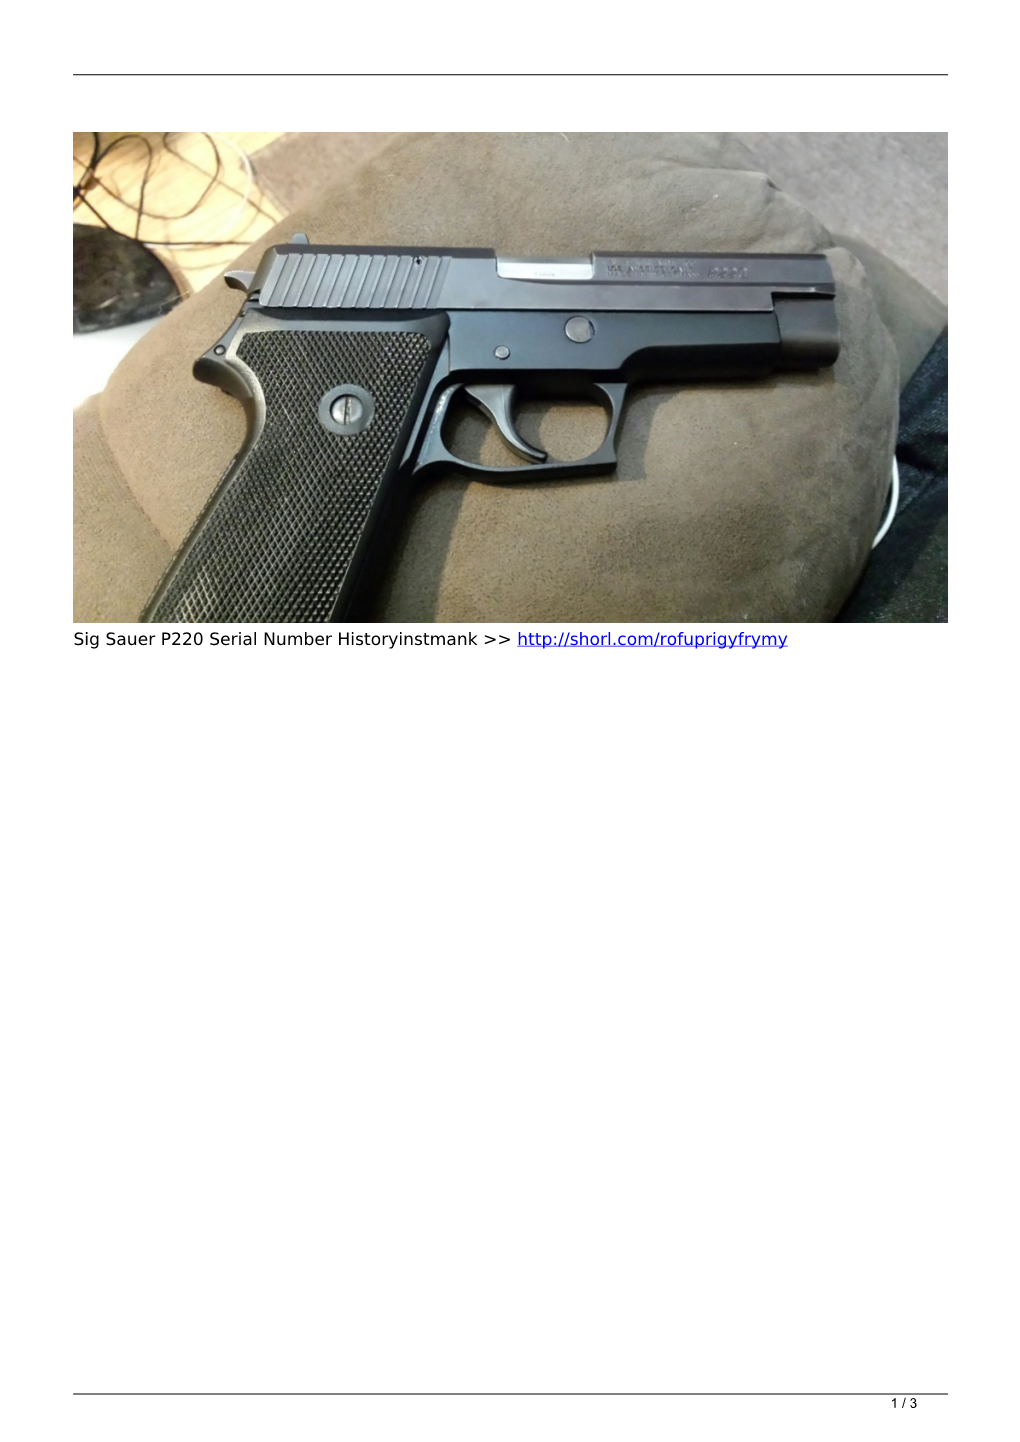 Sig Sauer P220 Serial Number Historyinstmank >>